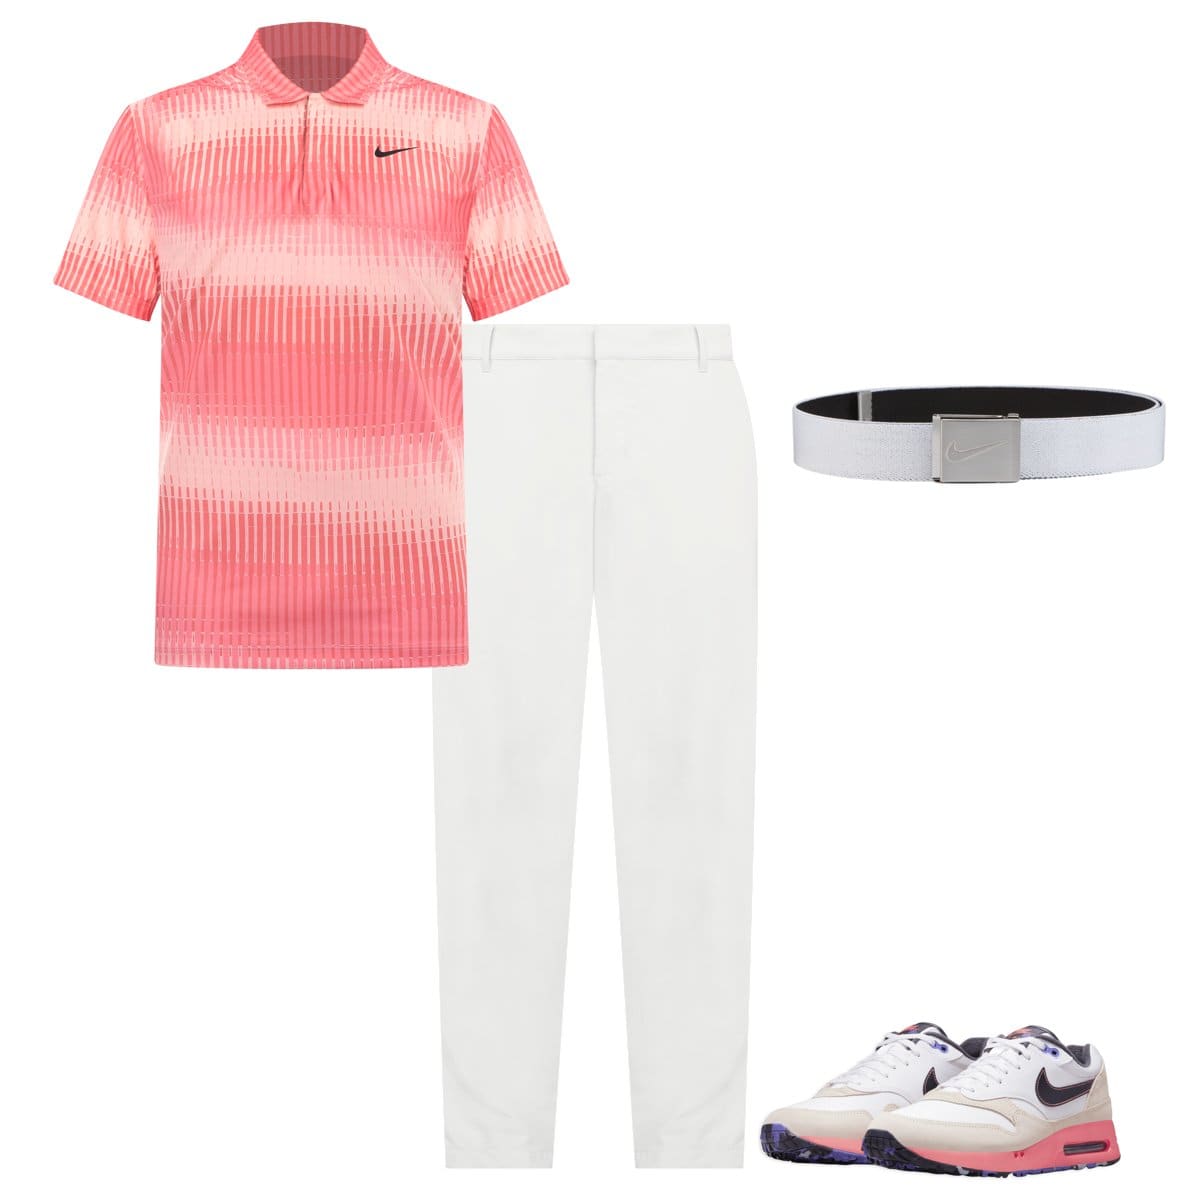 7 Golf Outfits for Men.